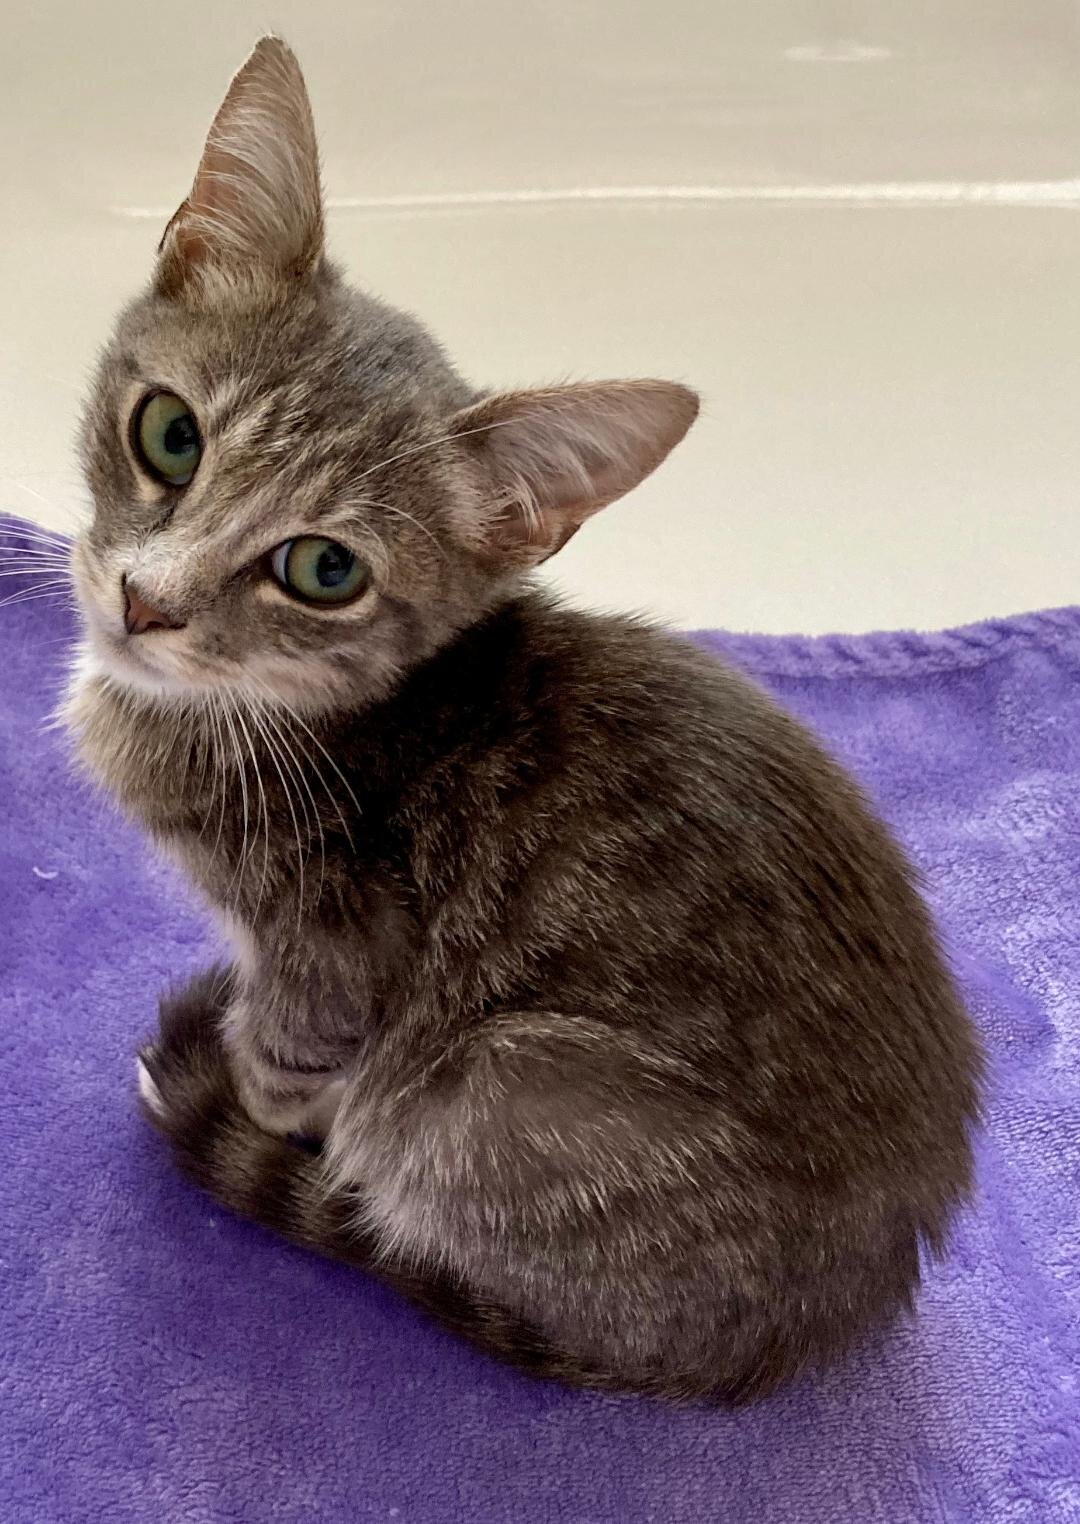 Looking To Adopt A Cat In Palm Beach County? — KitKats Rescue